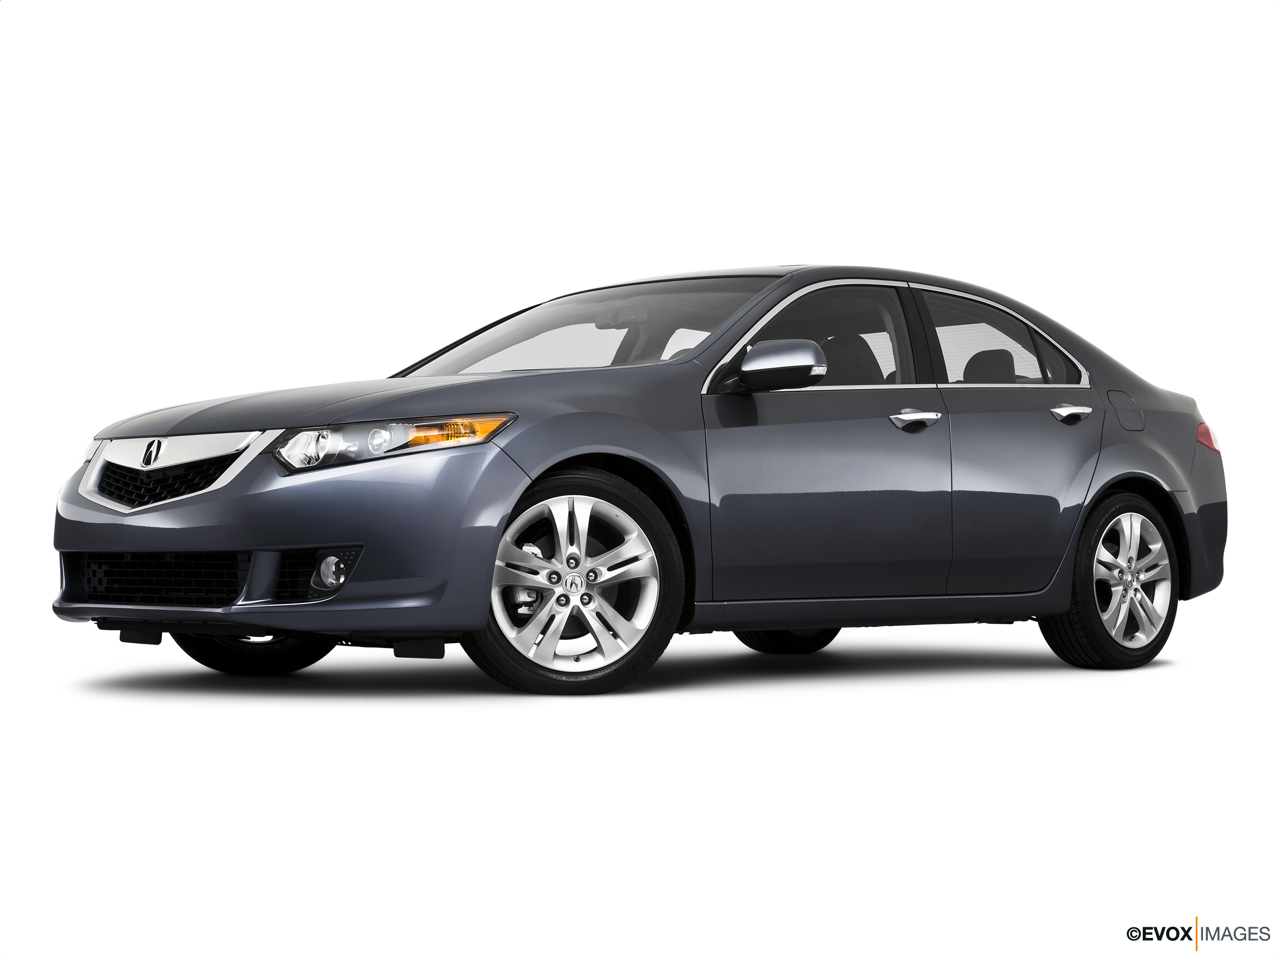 2010 Acura TSX V6 Low/wide front 5/8. 